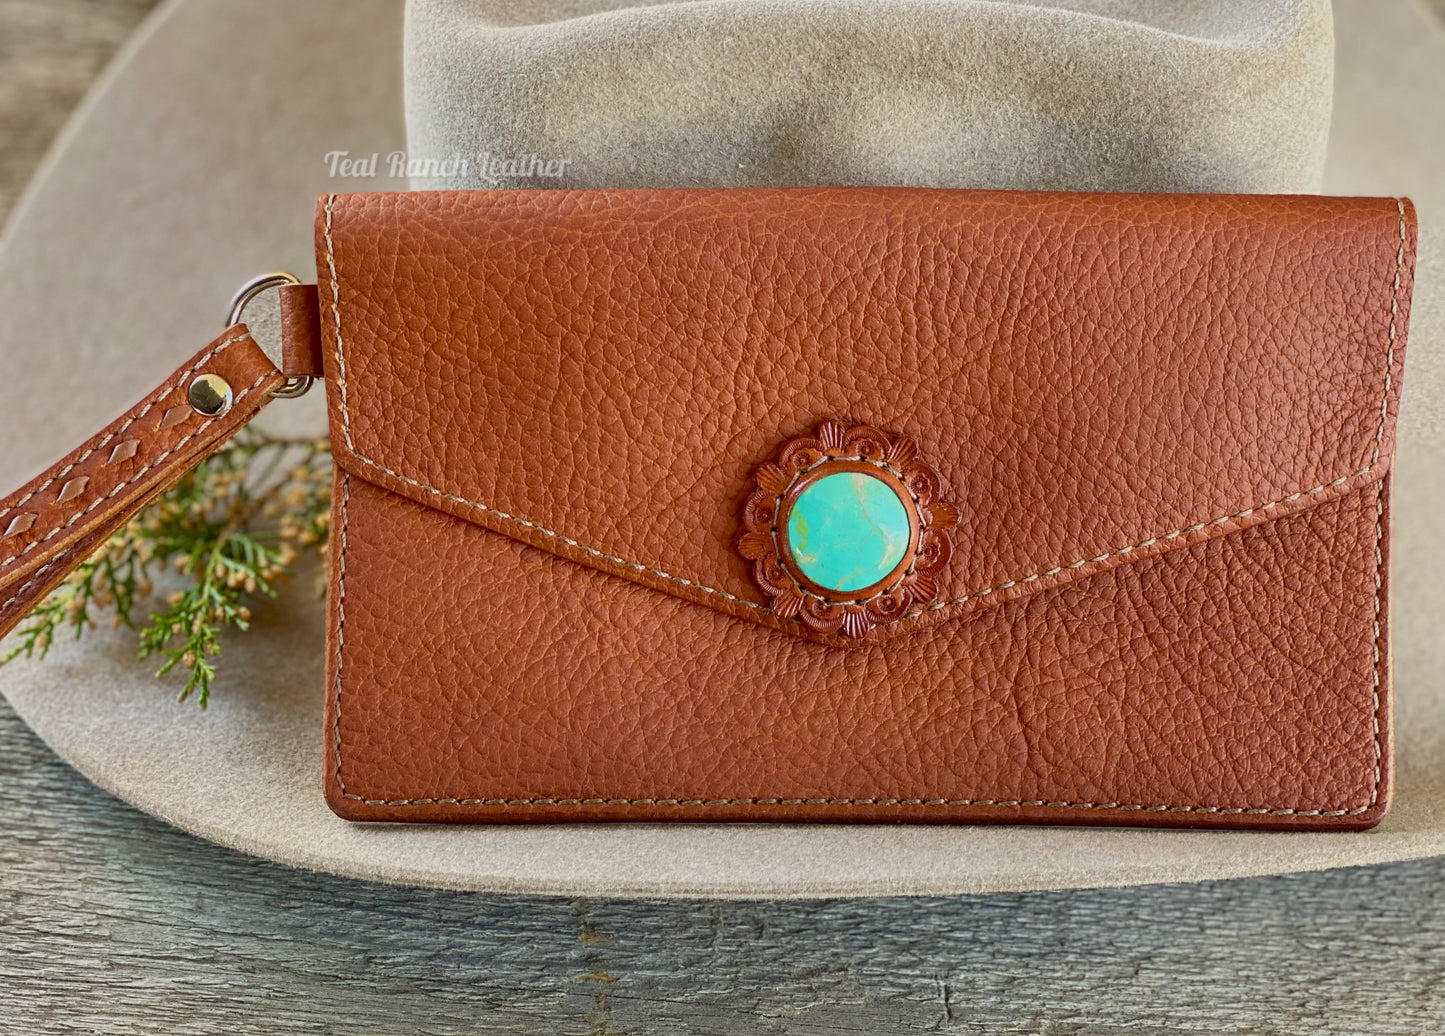 Turquoise and leather wristlet clutch